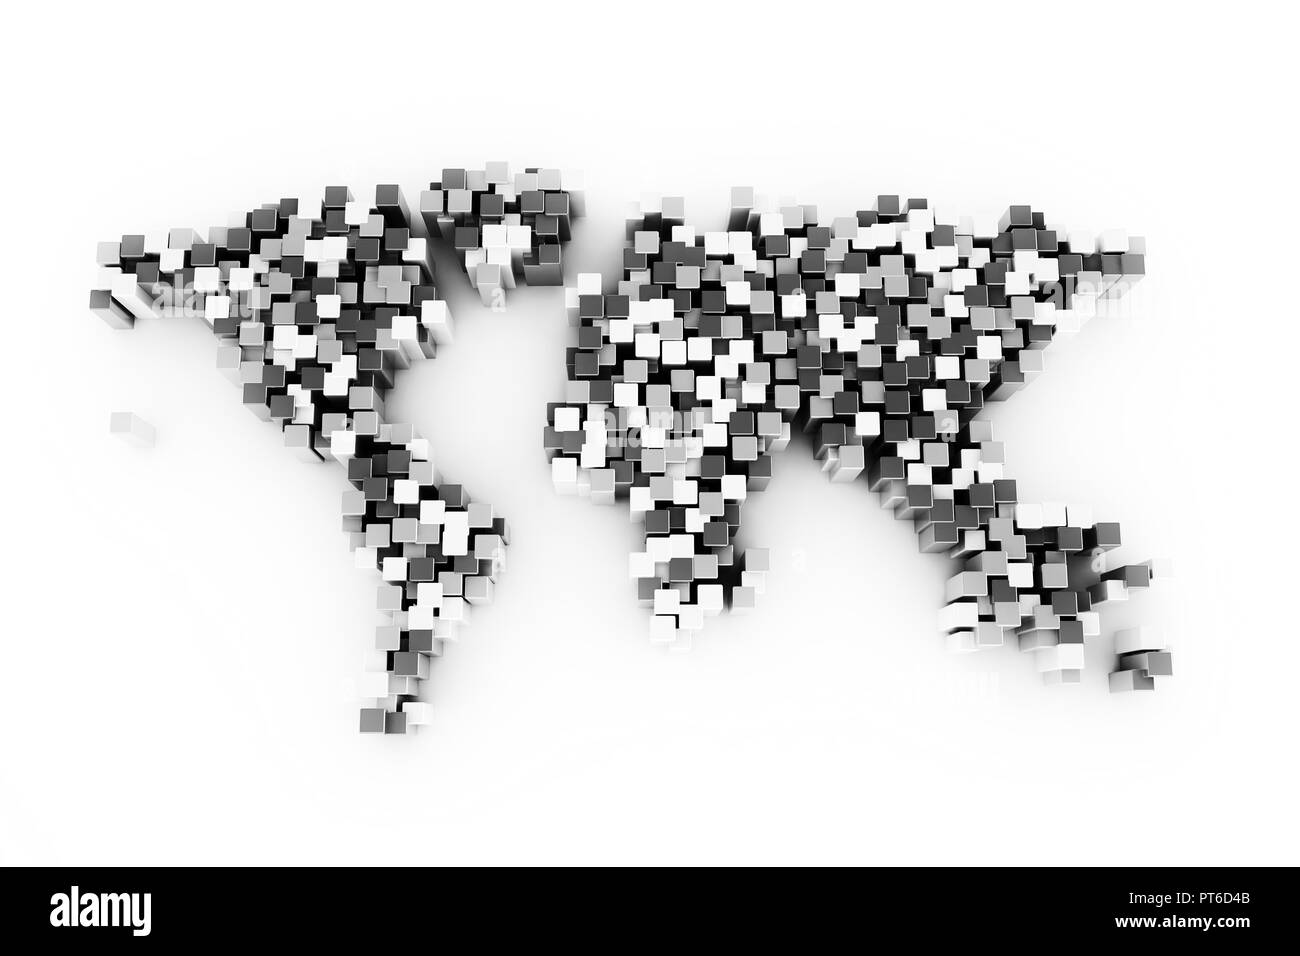 World map digital made from 3d cubes on white background Stock Photo